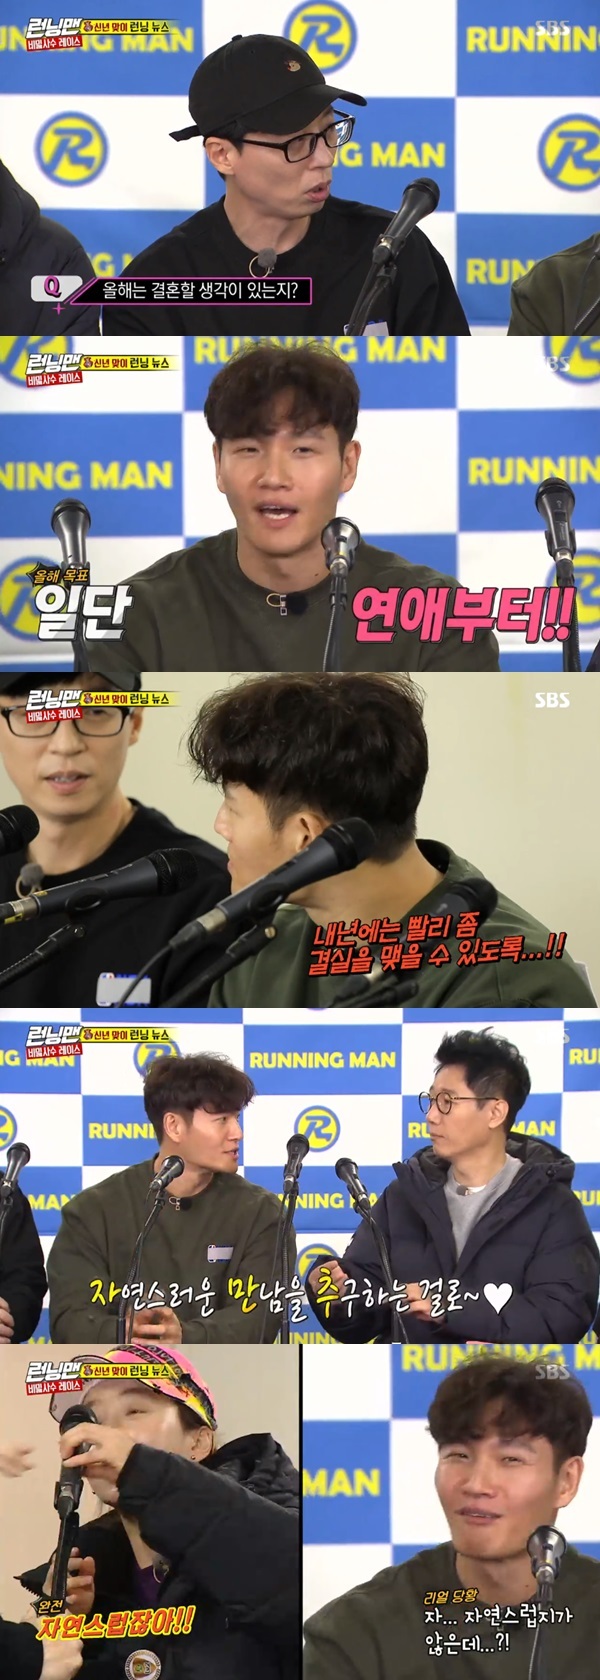 Seoul = = Running Man Kim Jong-kook reveals his thoughts on Love and marriageOn SBS Running Man broadcasted on the afternoon of the 13th, the New Years running news was drawn.On this day, Yoo Jae-Suk asked Kim Jong-kook if he had any idea of marriage.Kim Jong-kook said, I will do my love this year, he said. I will make a fruit next year.Kim Jong-kook then said, The introduction is burdensome and natural. Song Ji-hyo laughed, saying, Im here too.Meanwhile, Running Man is a program that solves the missions of the best South Korean entertainers everywhere, and reveals the hidden back of the South Korean landmarks through constant racing and tense confrontation.It airs every Sunday at 4:50 p.m.